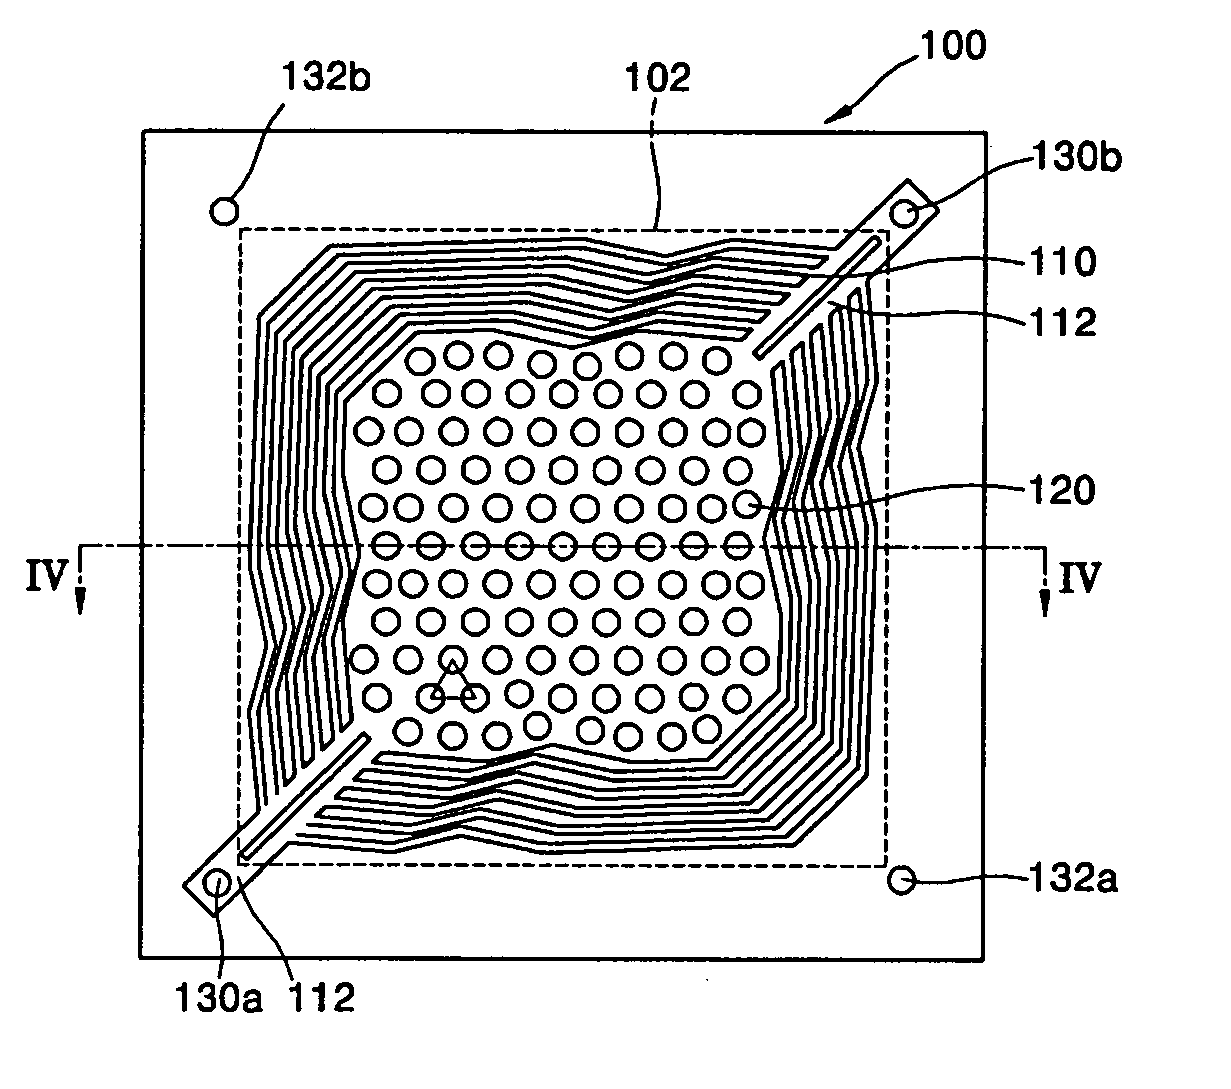 Bipolar plate and direct liquid feed fuel cell stack